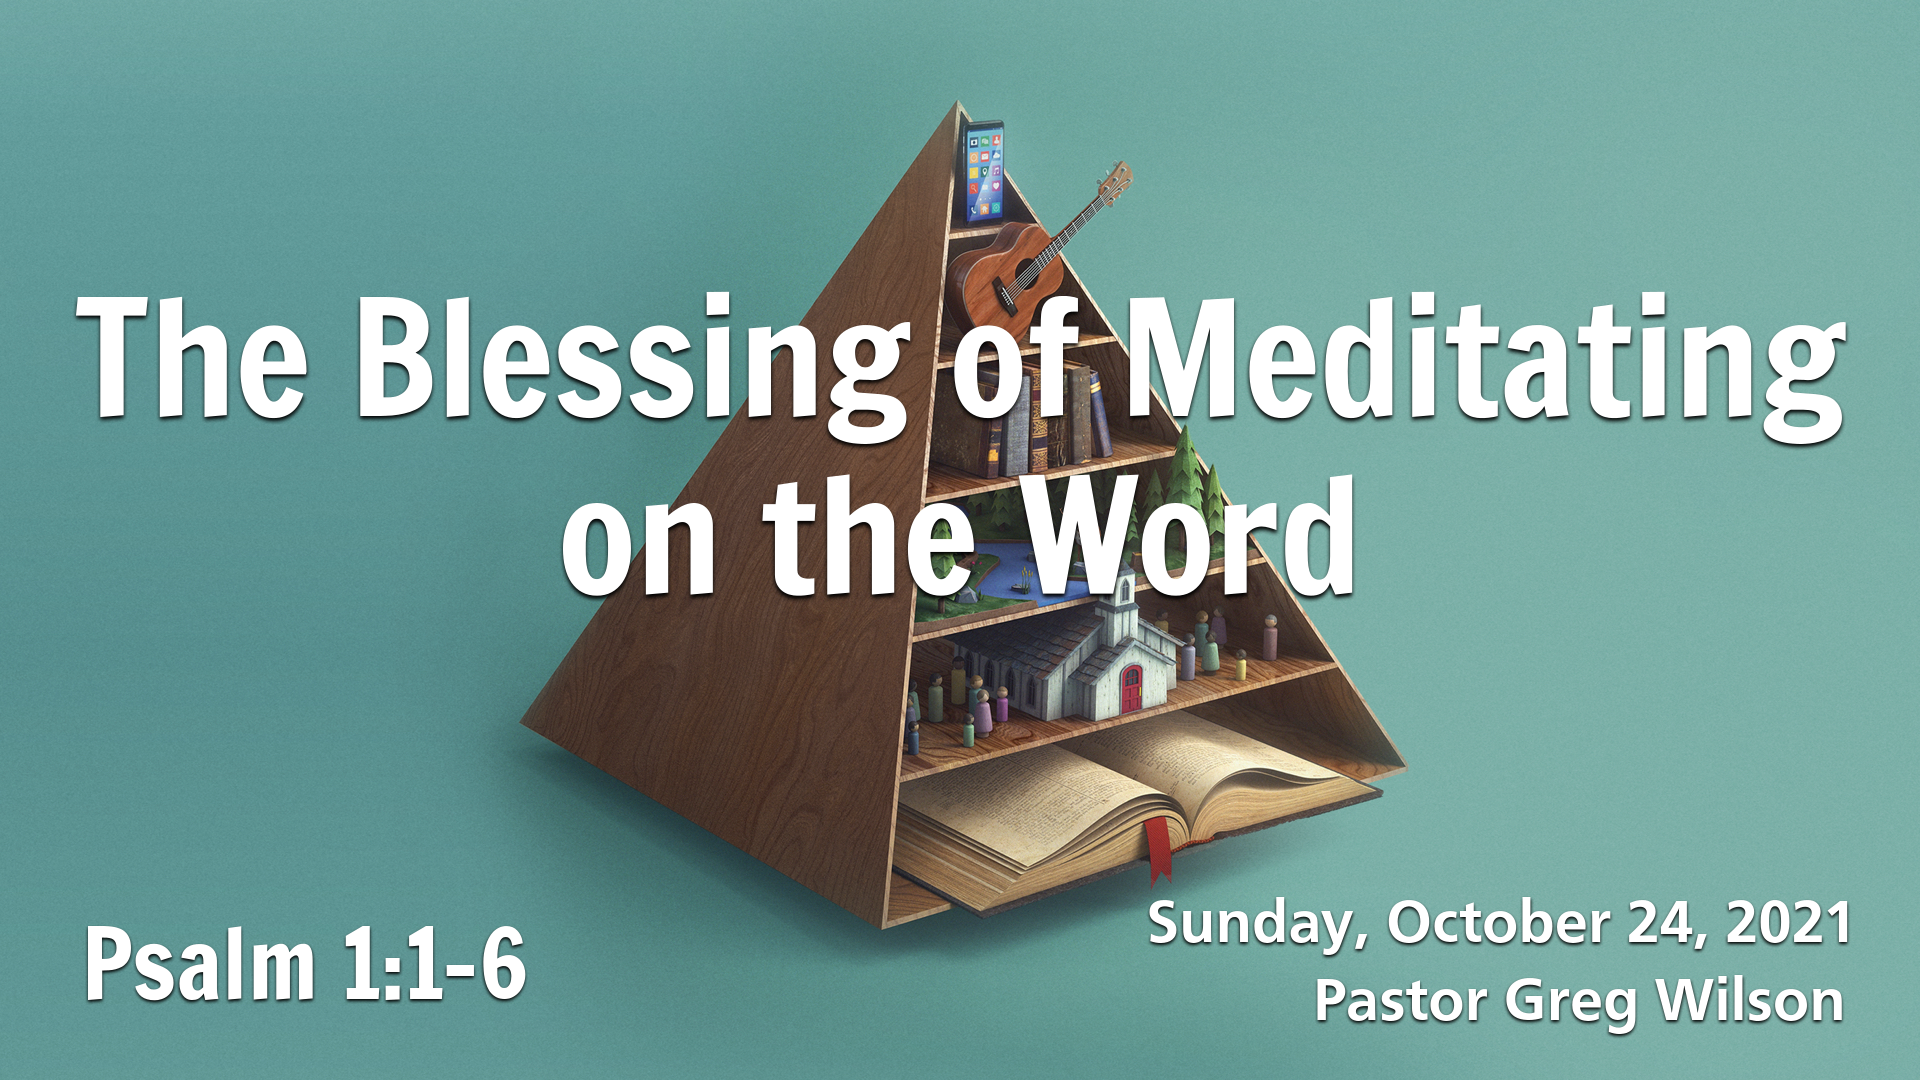 "The Blessing of Meditating on the Word"